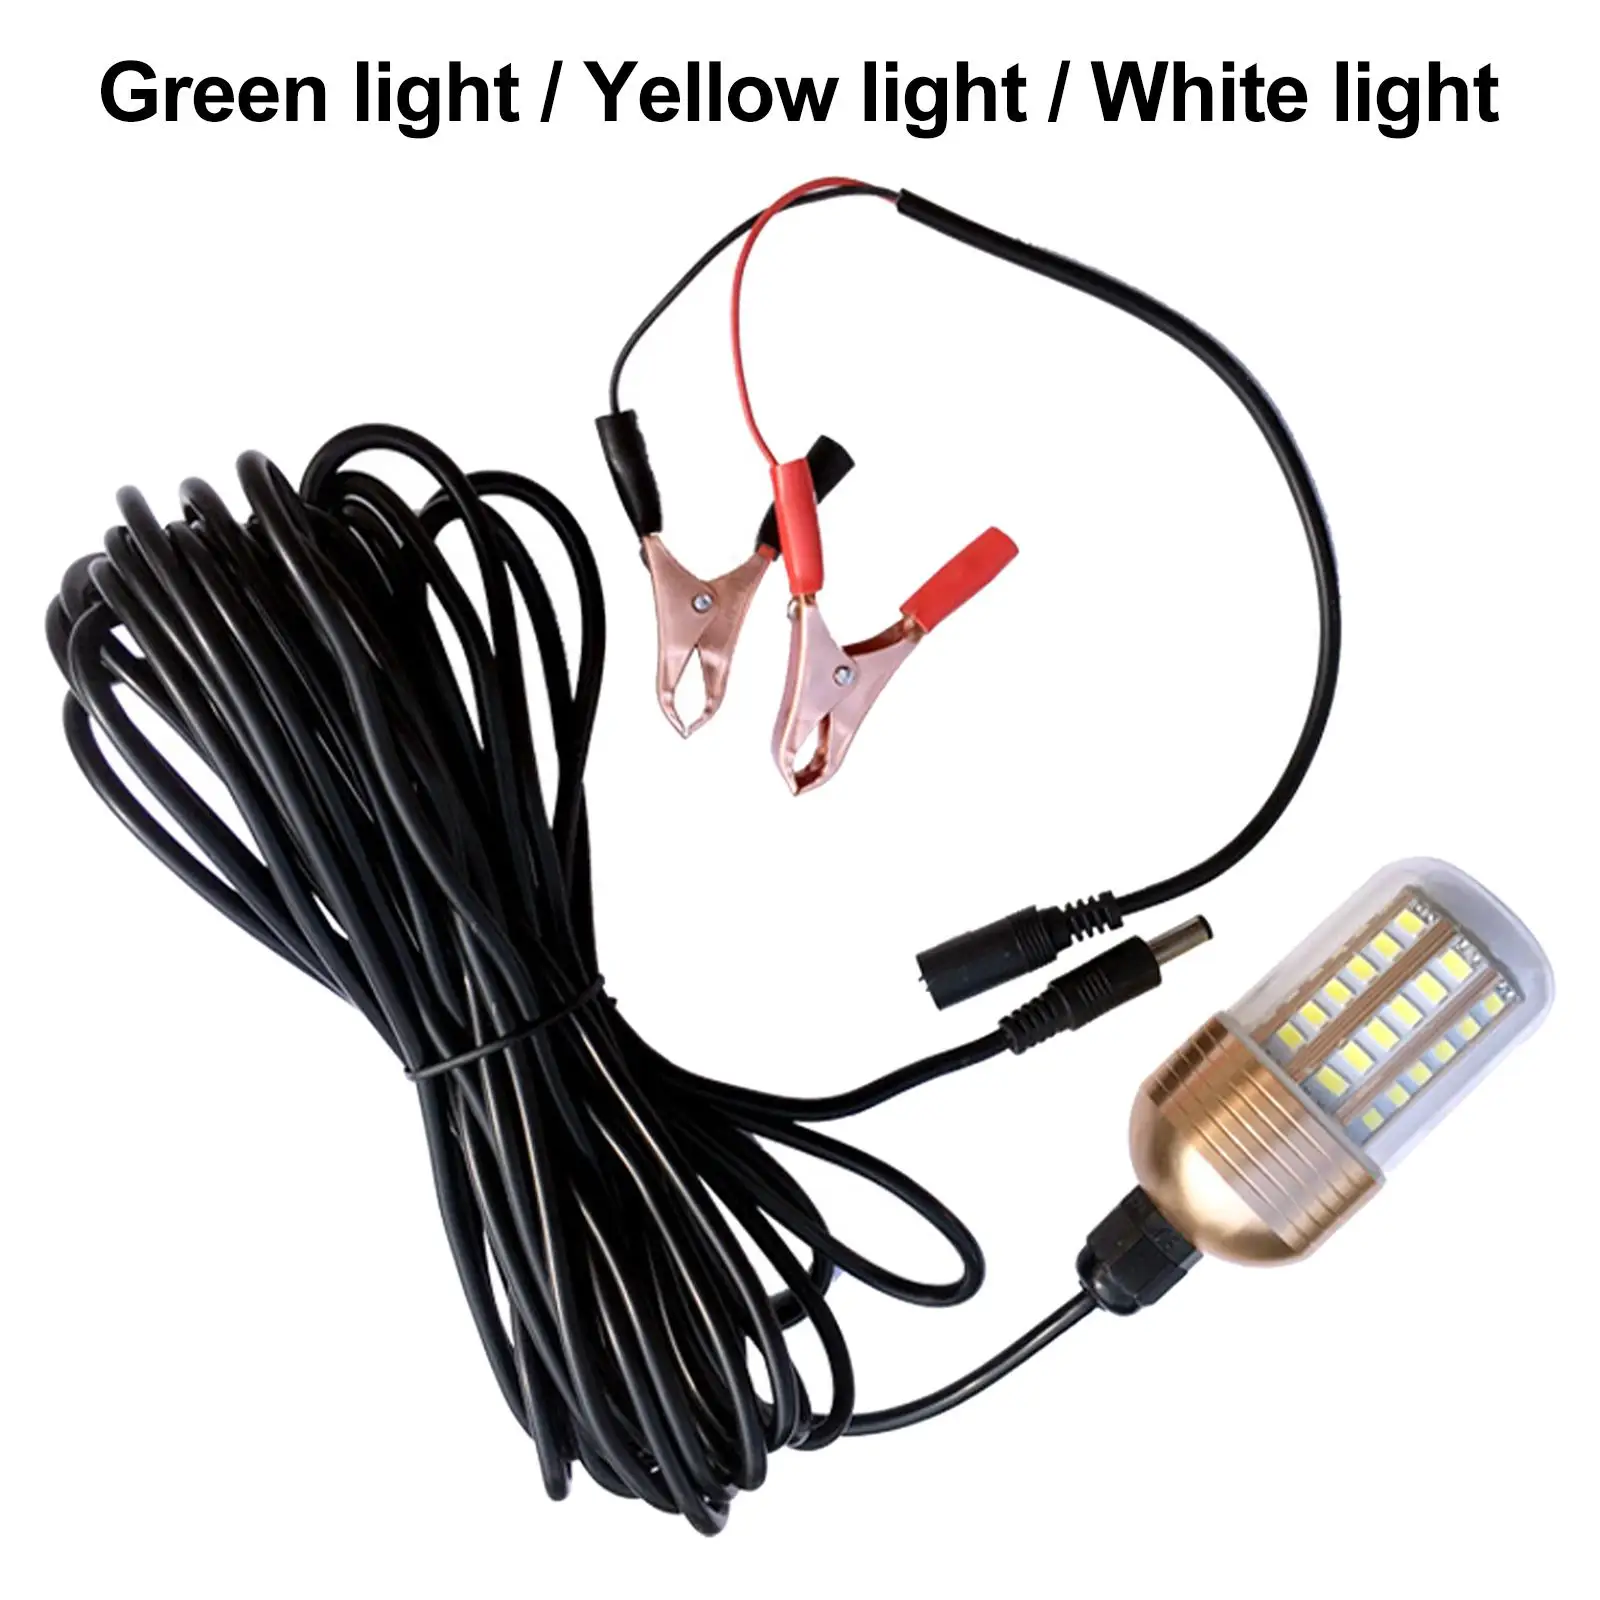 12V 60 LED Submersible Underwater Light, Lure Bait Finder, Night Fishing Finder Lamp for Outdoor Fishing